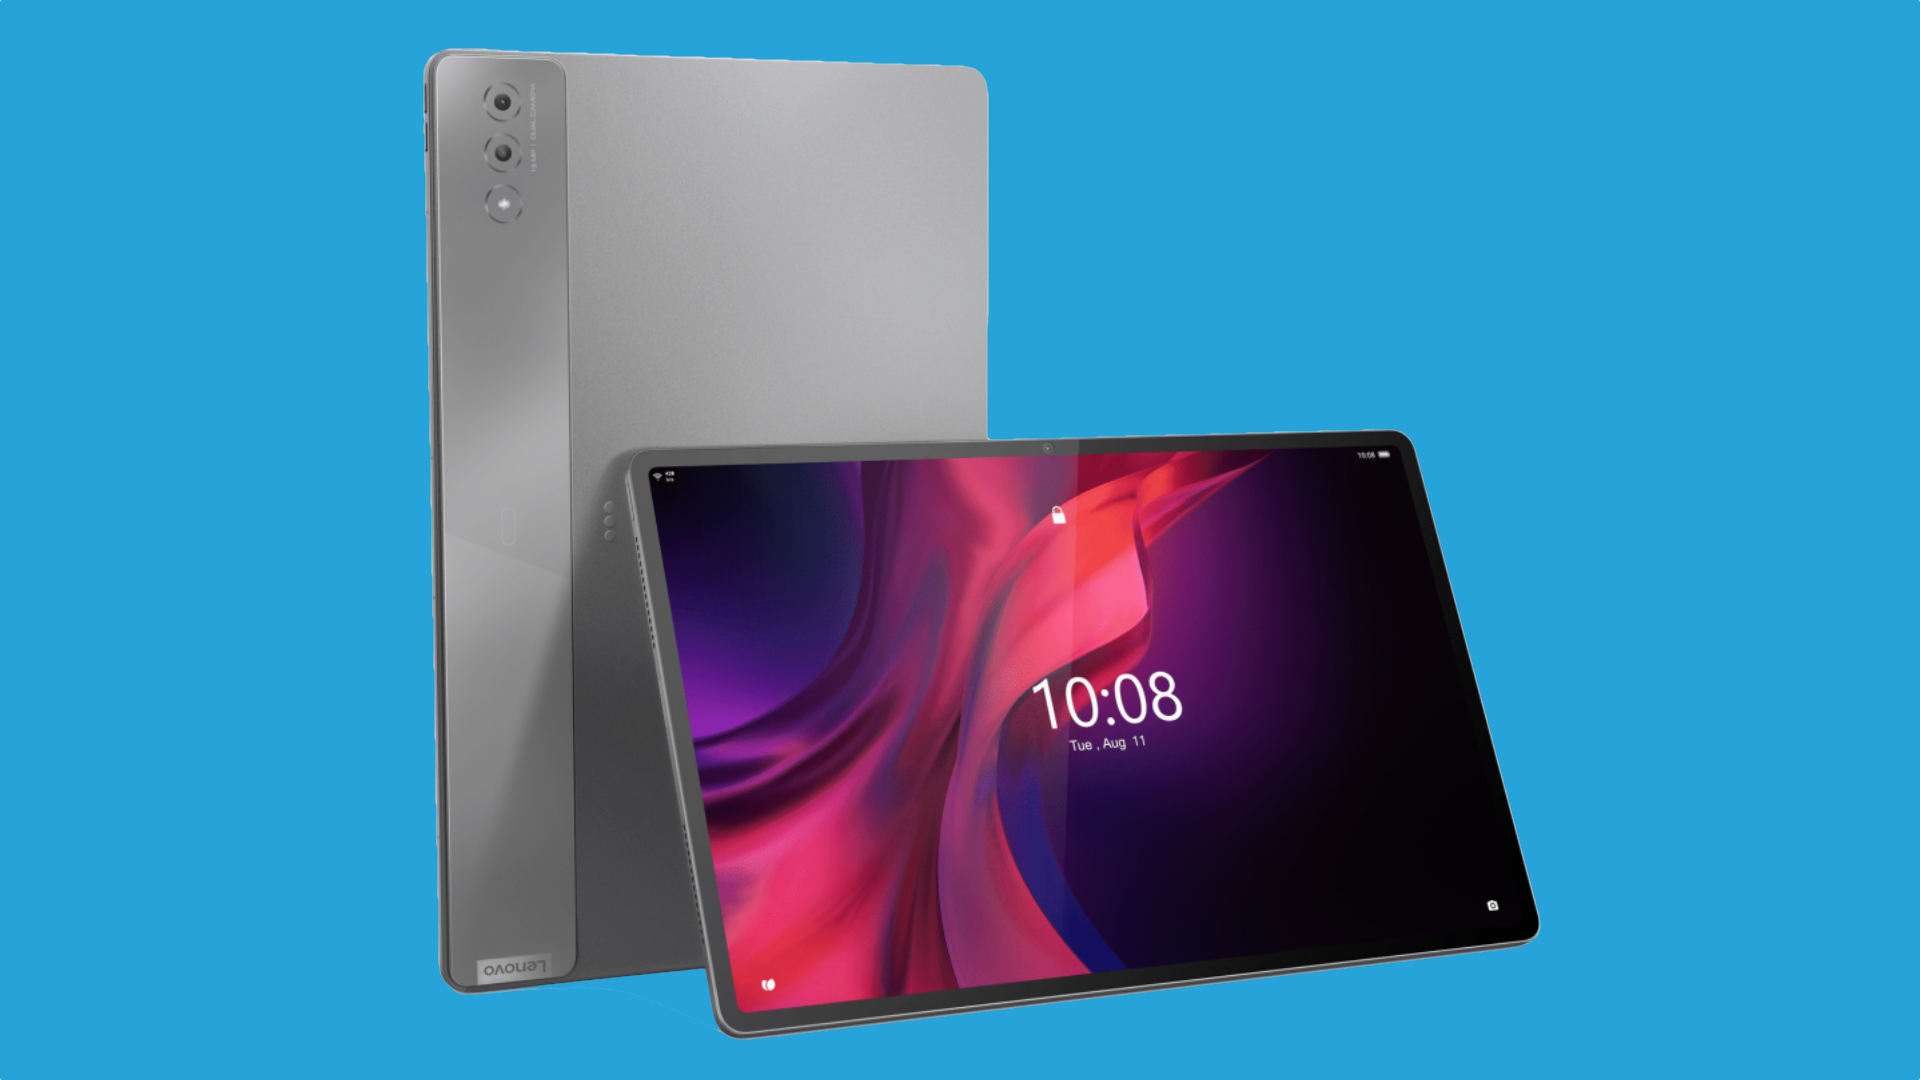 Lenovo Tab Extreme is here to challenge Galaxy Tab S8 Ultra - SamMobile